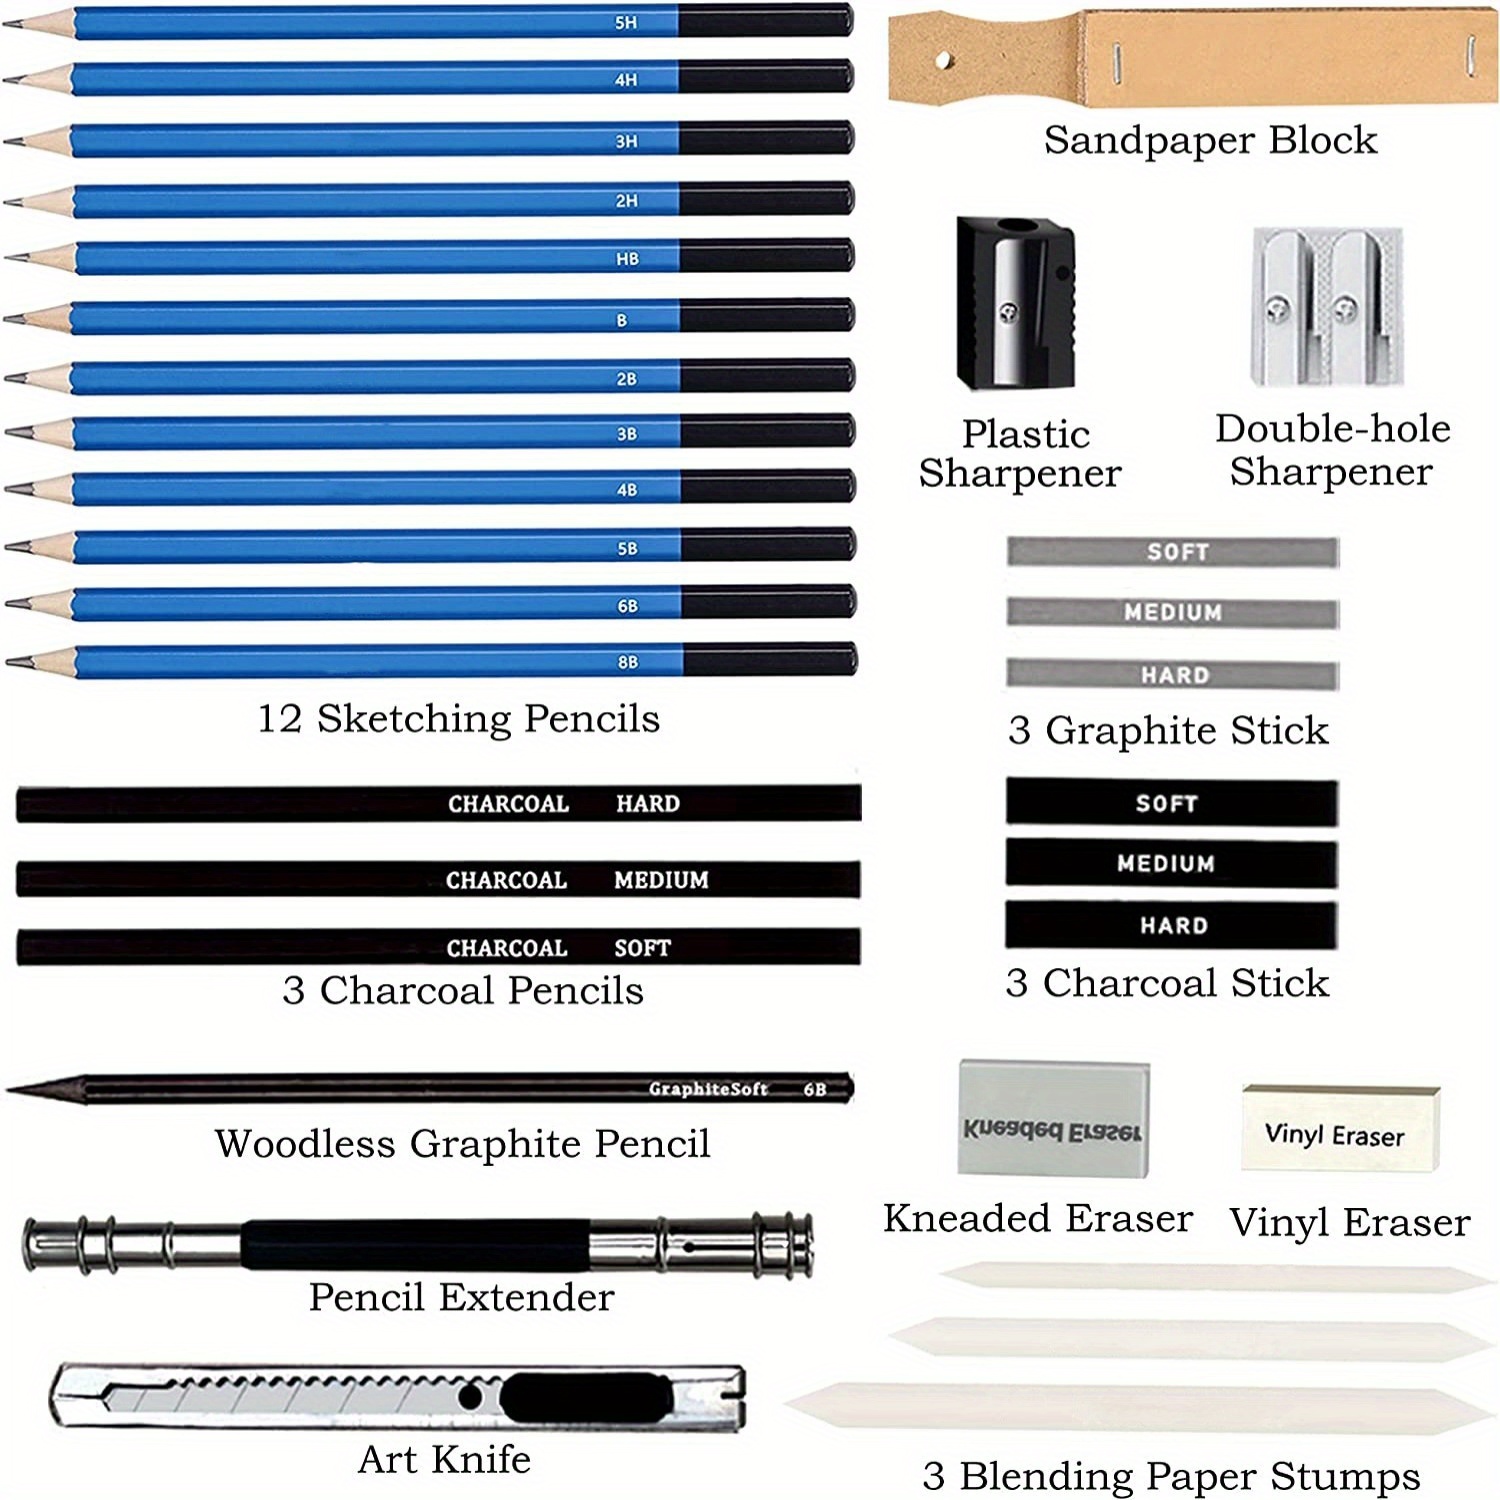 The 14 Different Types of Pencils Every Drawing Set Needs